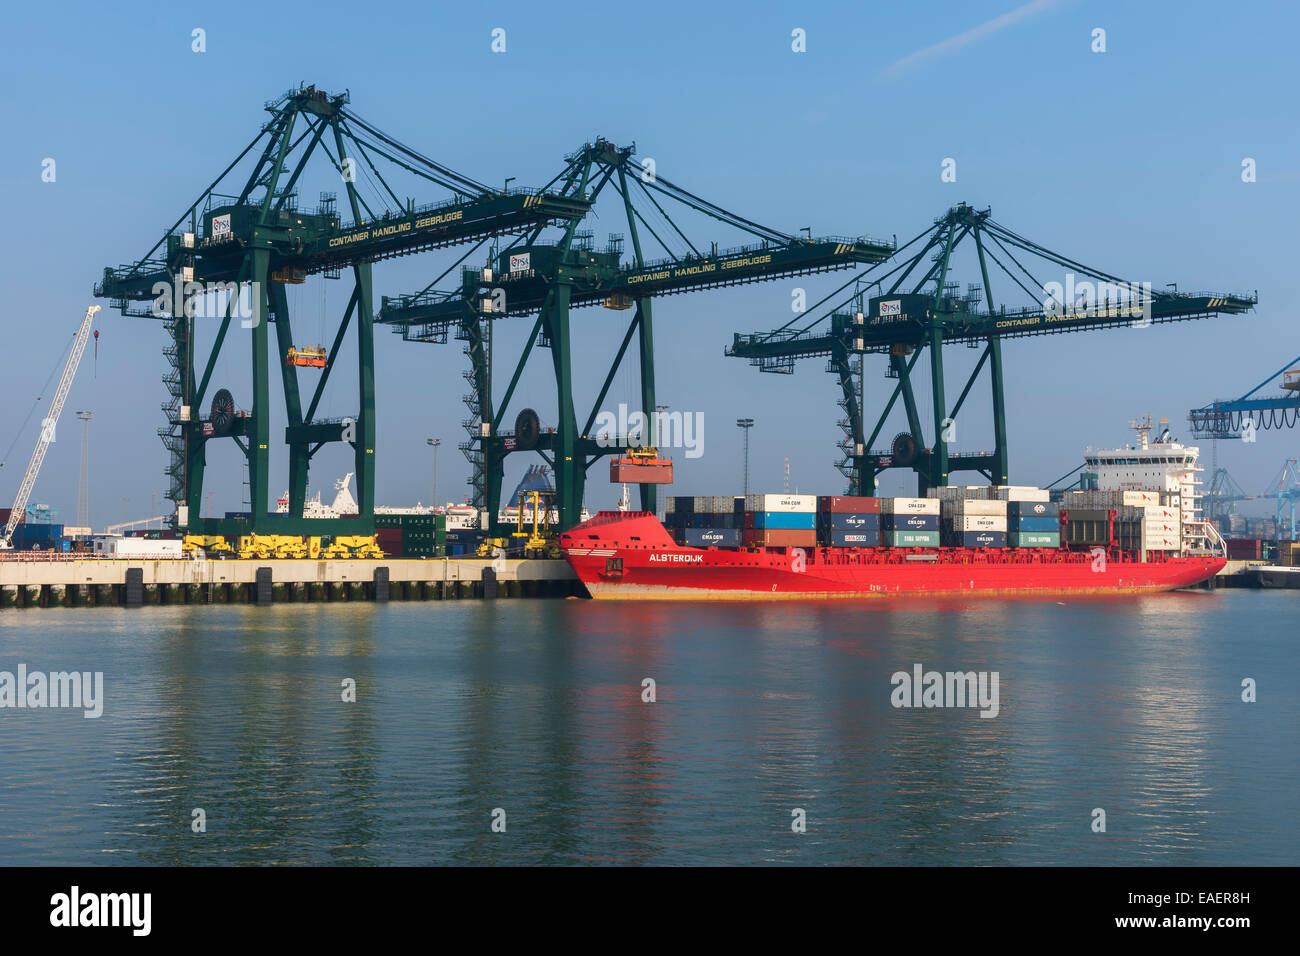 Wider view on port of Zeebrugge-Seabruges. Stock Photo